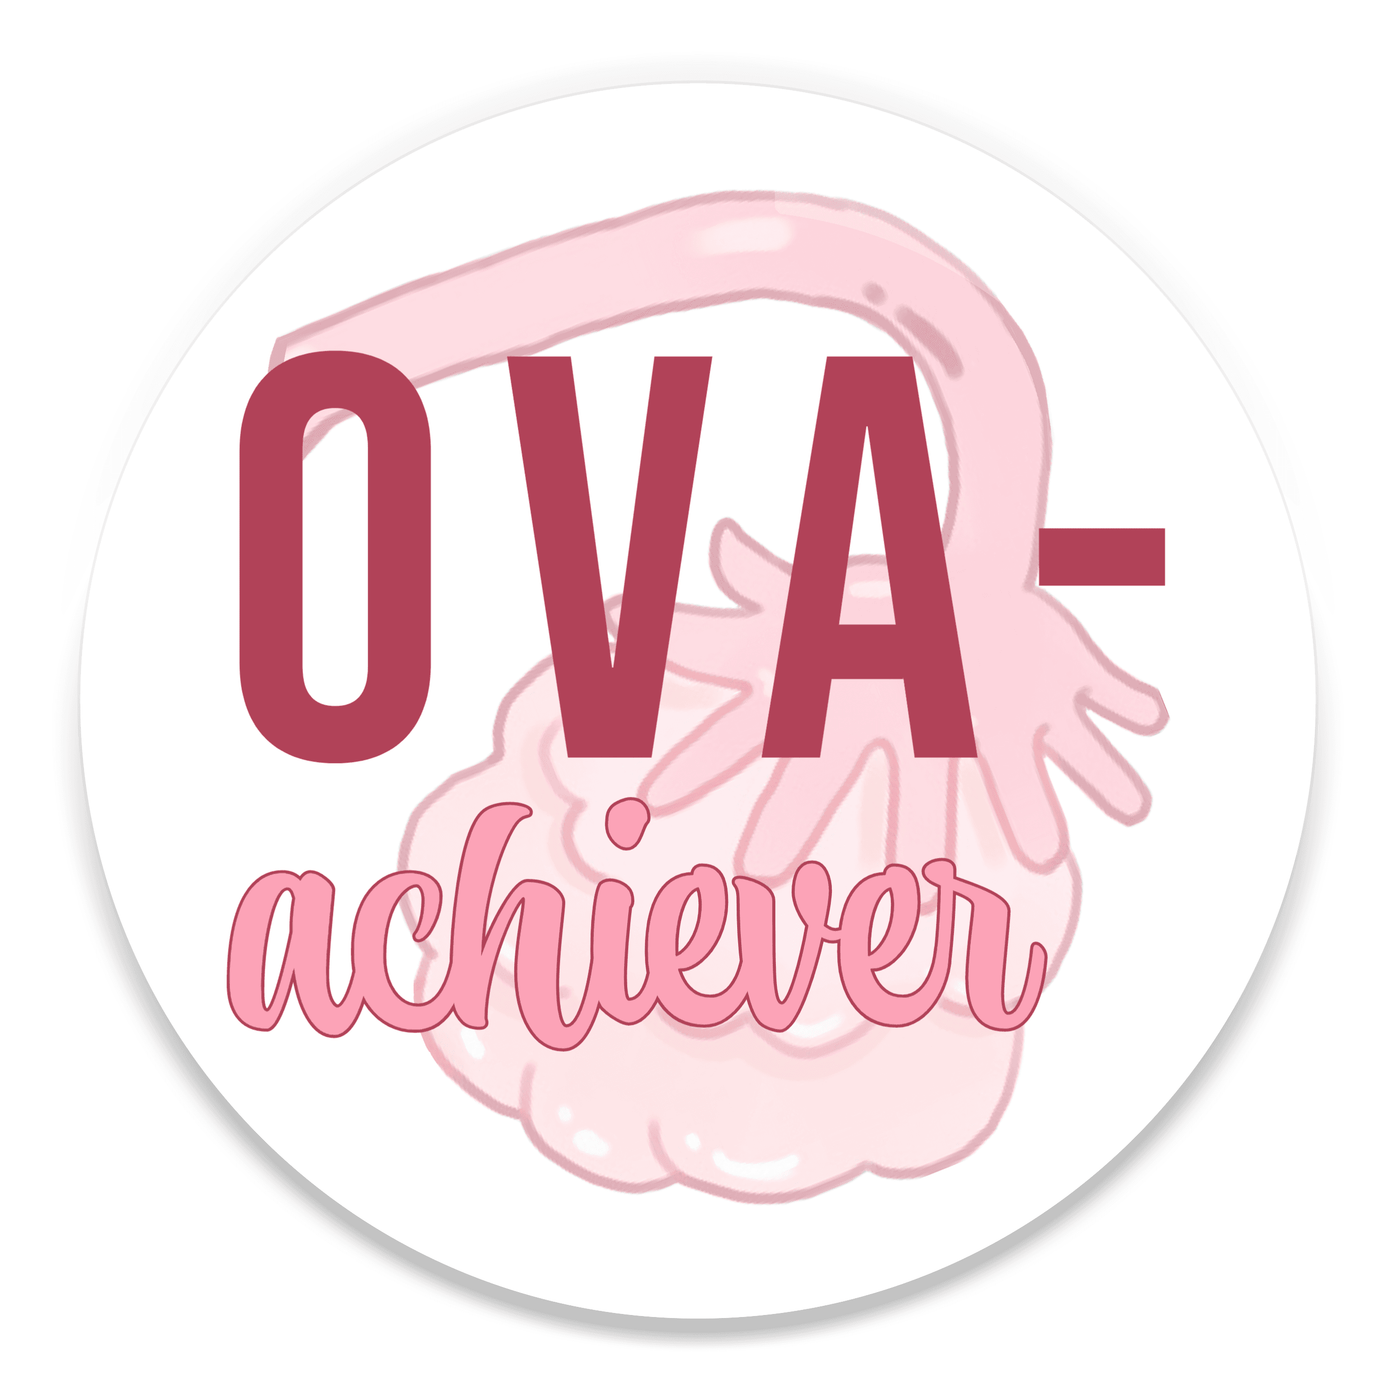 2.25 inch round colorful magnet with image of an ovary with text that says ova-achiever